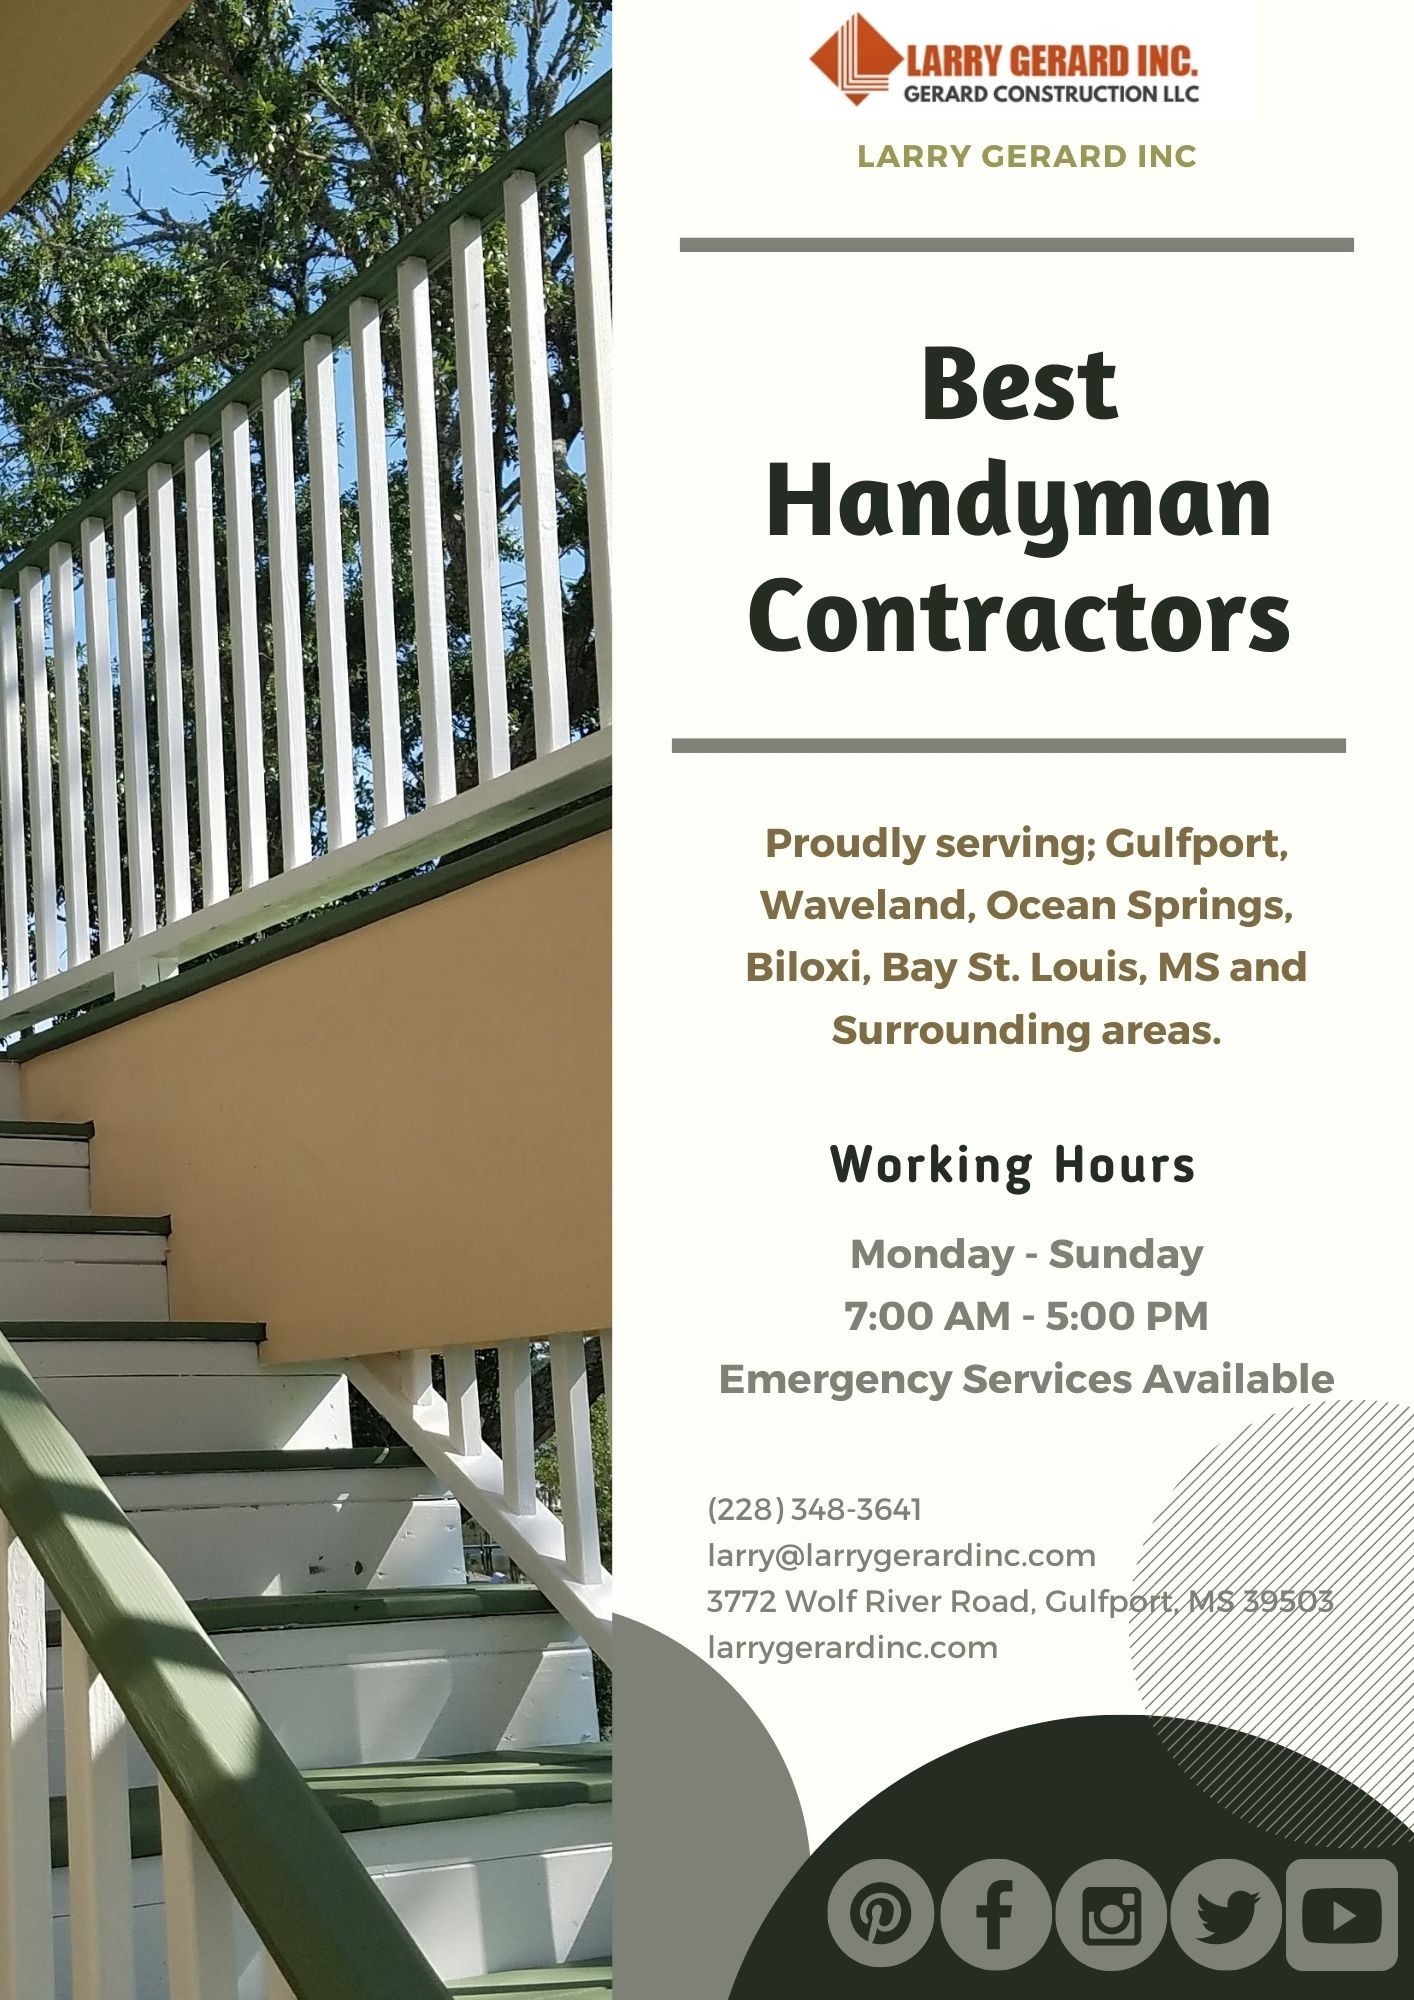 Reliable Professional Handyman Contractors & Their Service